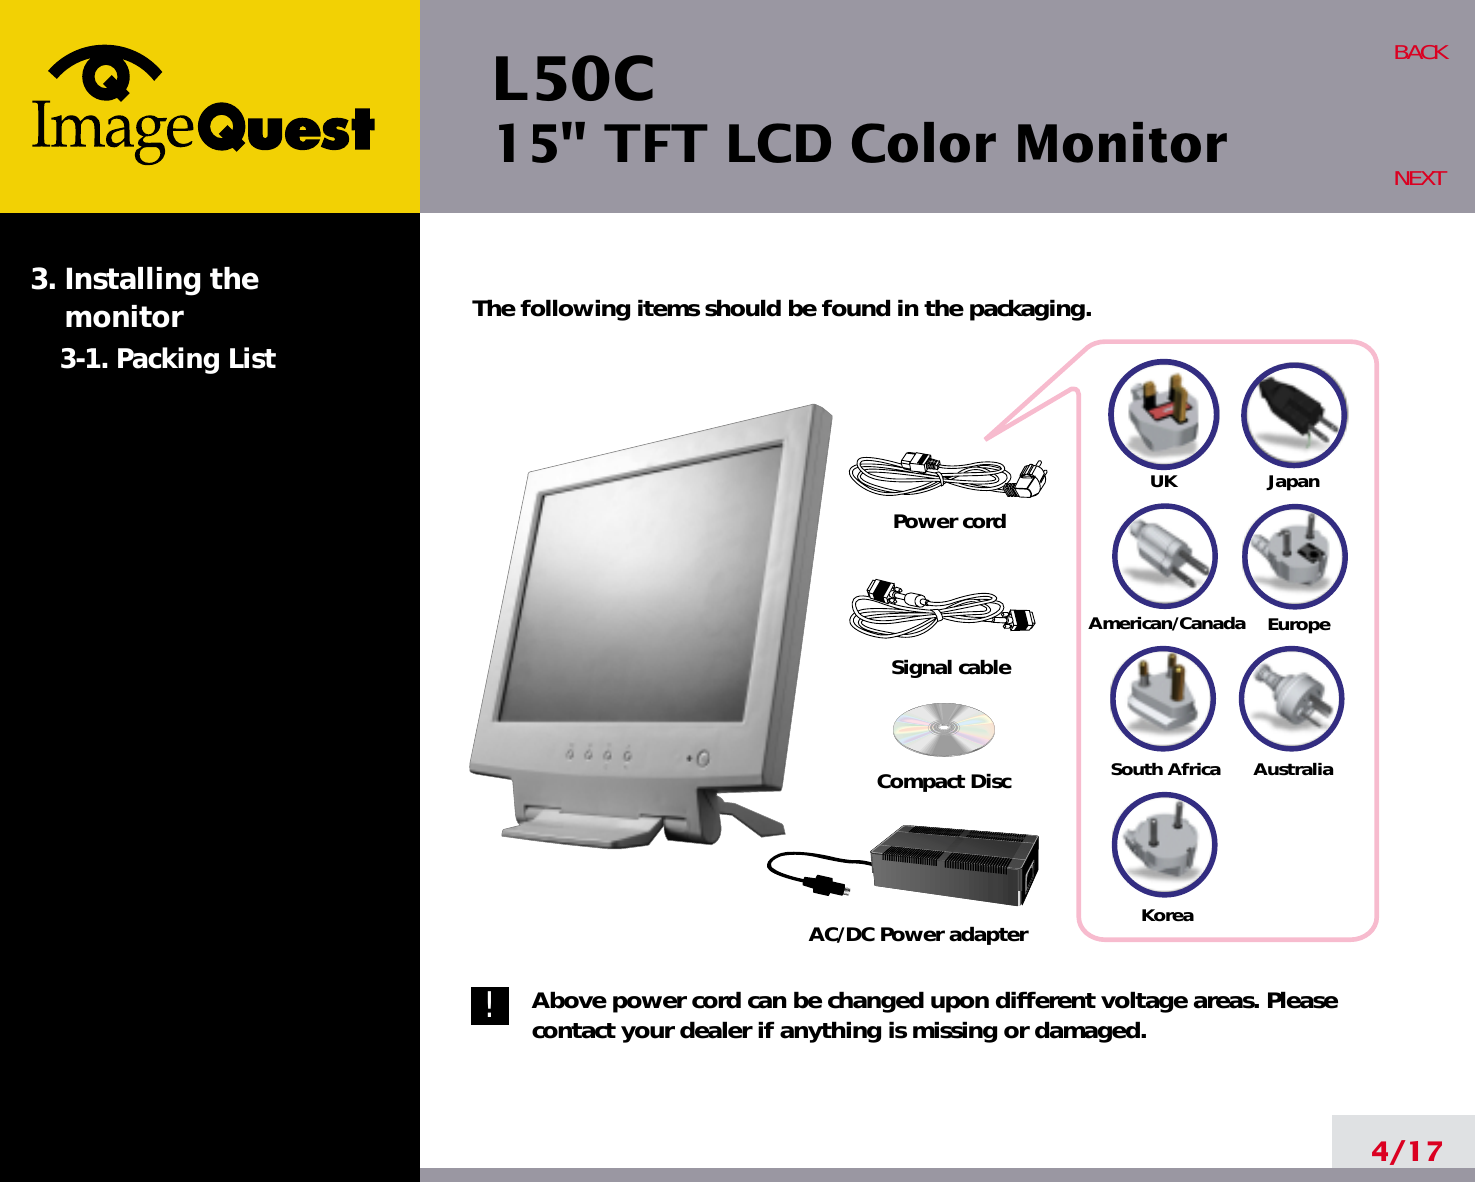 L50C15&quot; TFT LCD Color Monitor4/17BACKNEXTThe following items should be found in the packaging.Above power cord can be changed upon different voltage areas. Pleasecontact your dealer if anything is missing or damaged.3. Installing the monitor3-1. Packing List!UKAmerican/CanadaJapanAustraliaKoreaEuropeSouth AfricaPower cordSignal cableAC/DC Power adapterCompact Disc